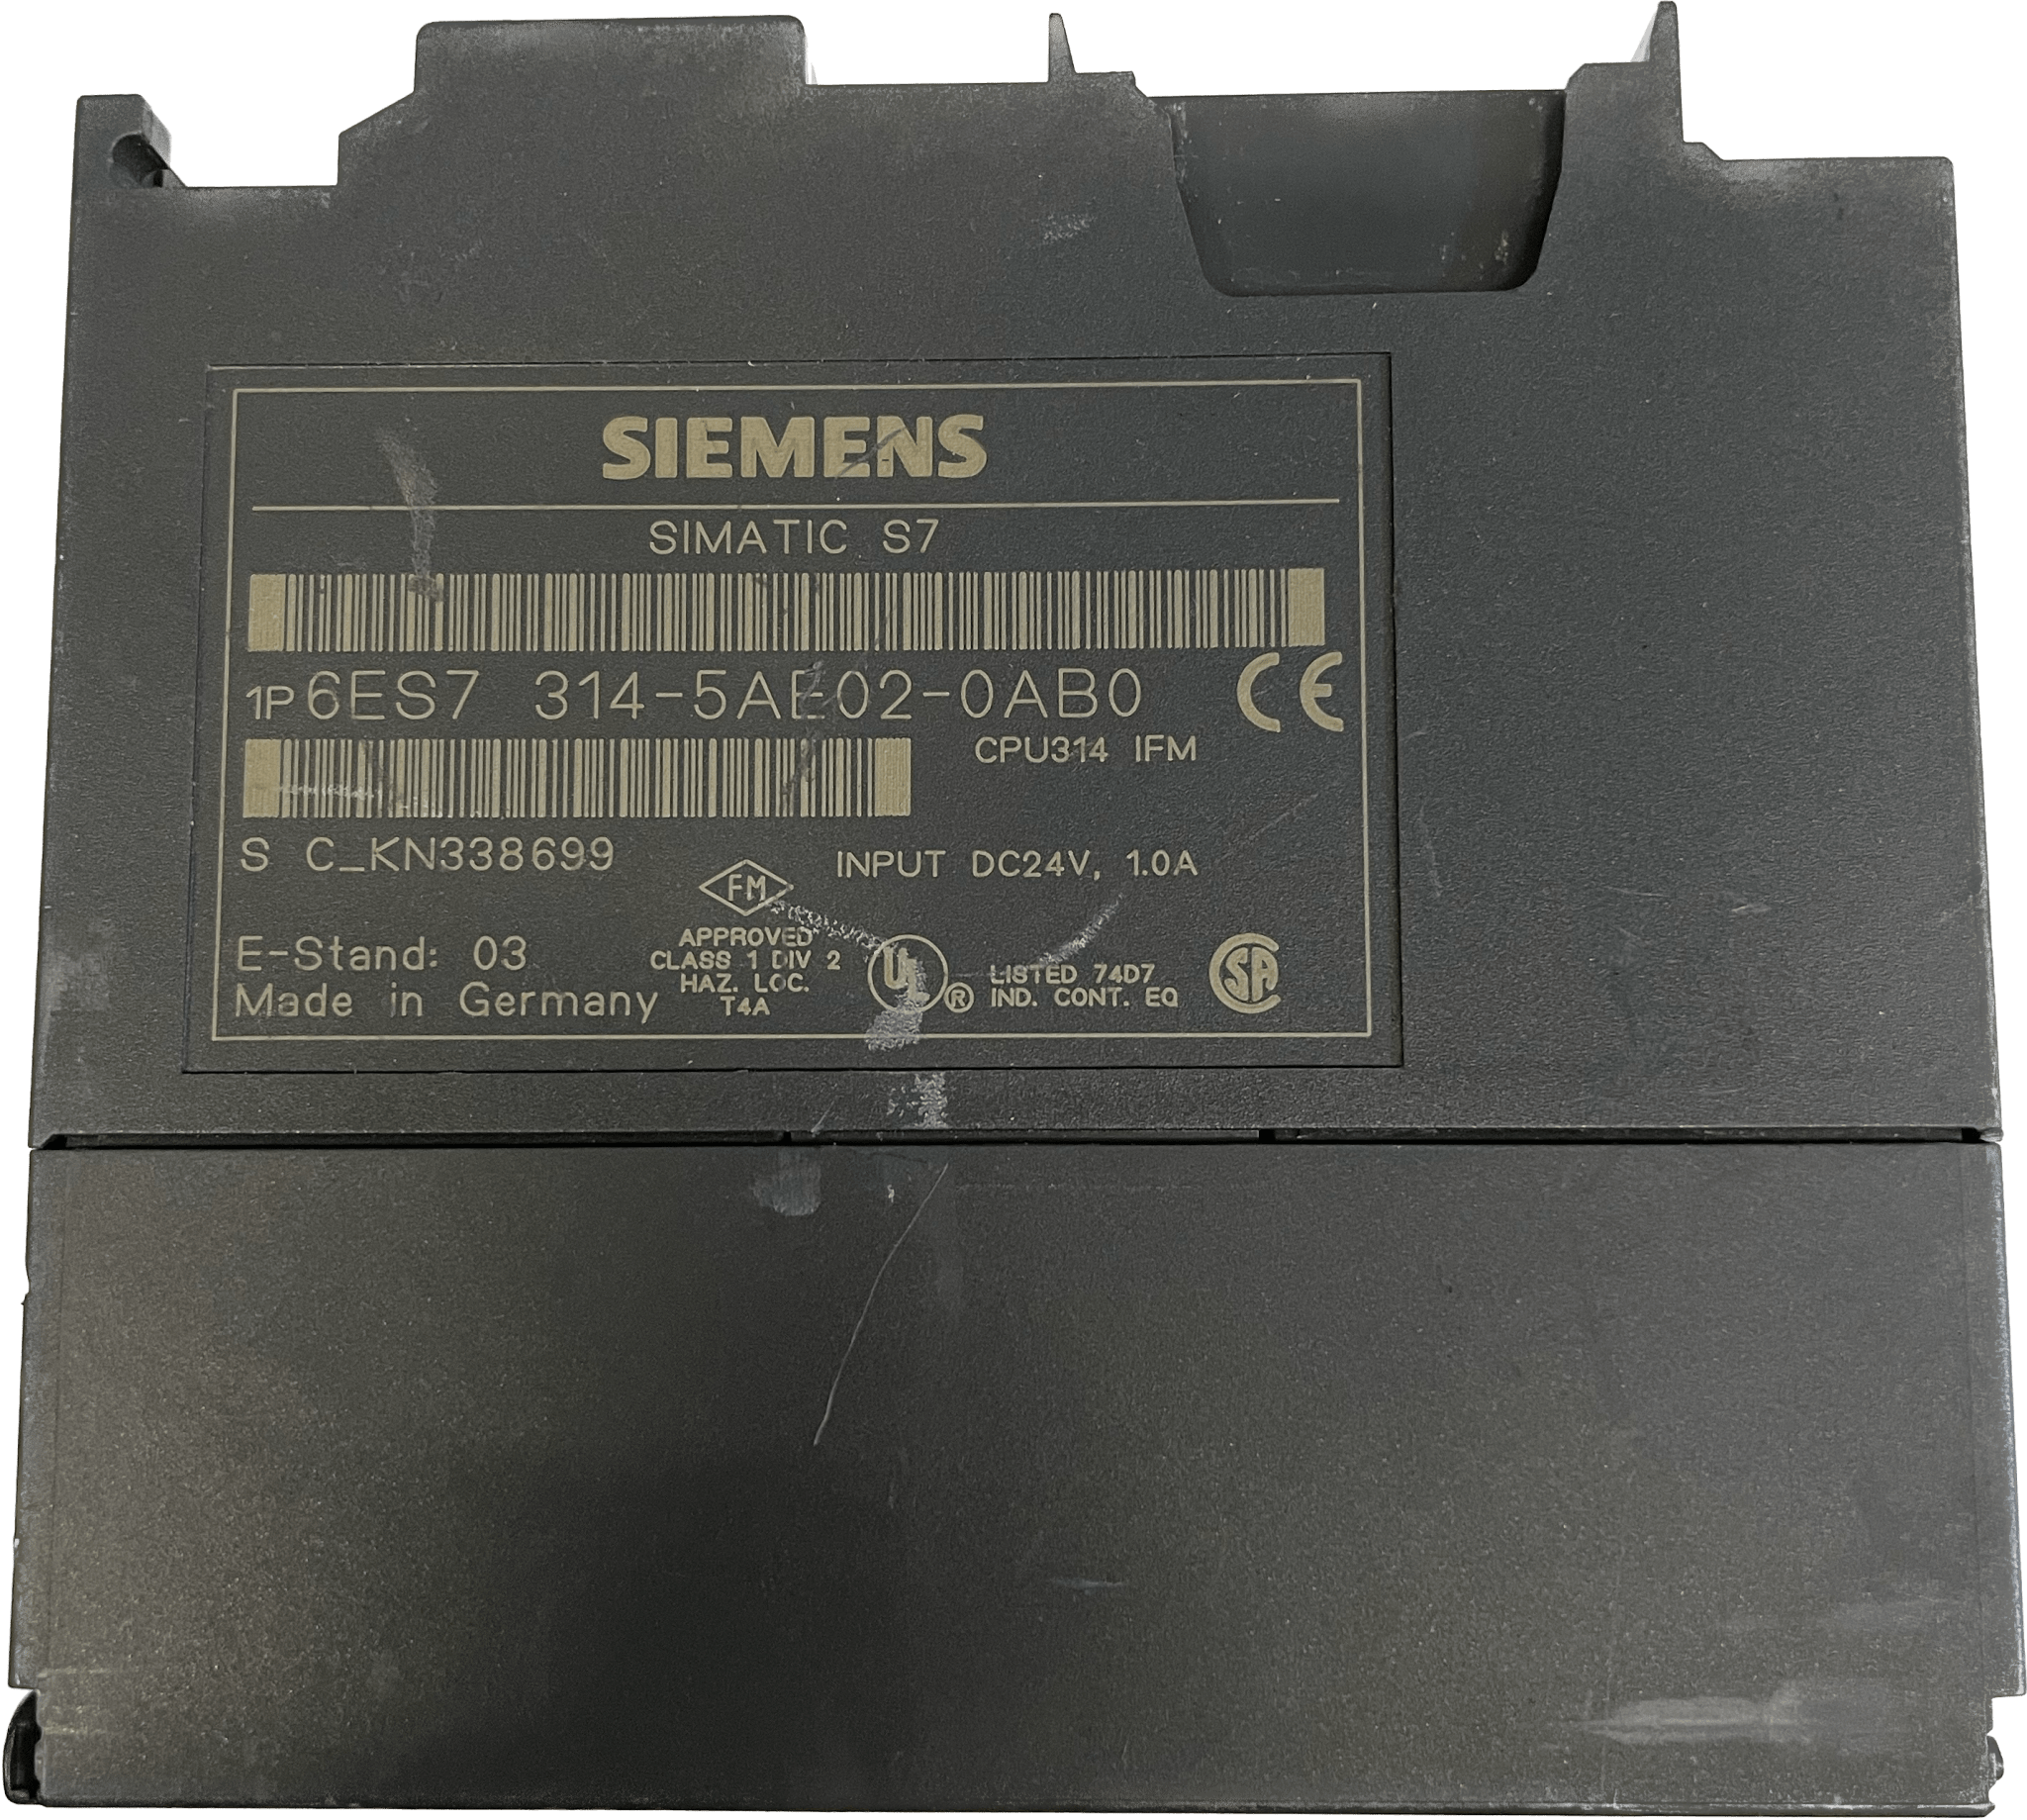 Siemens SIMATIC S7-300 6ES7 314-5AE02-0AB0 - #product_category# | Klenk Maschinenhandel